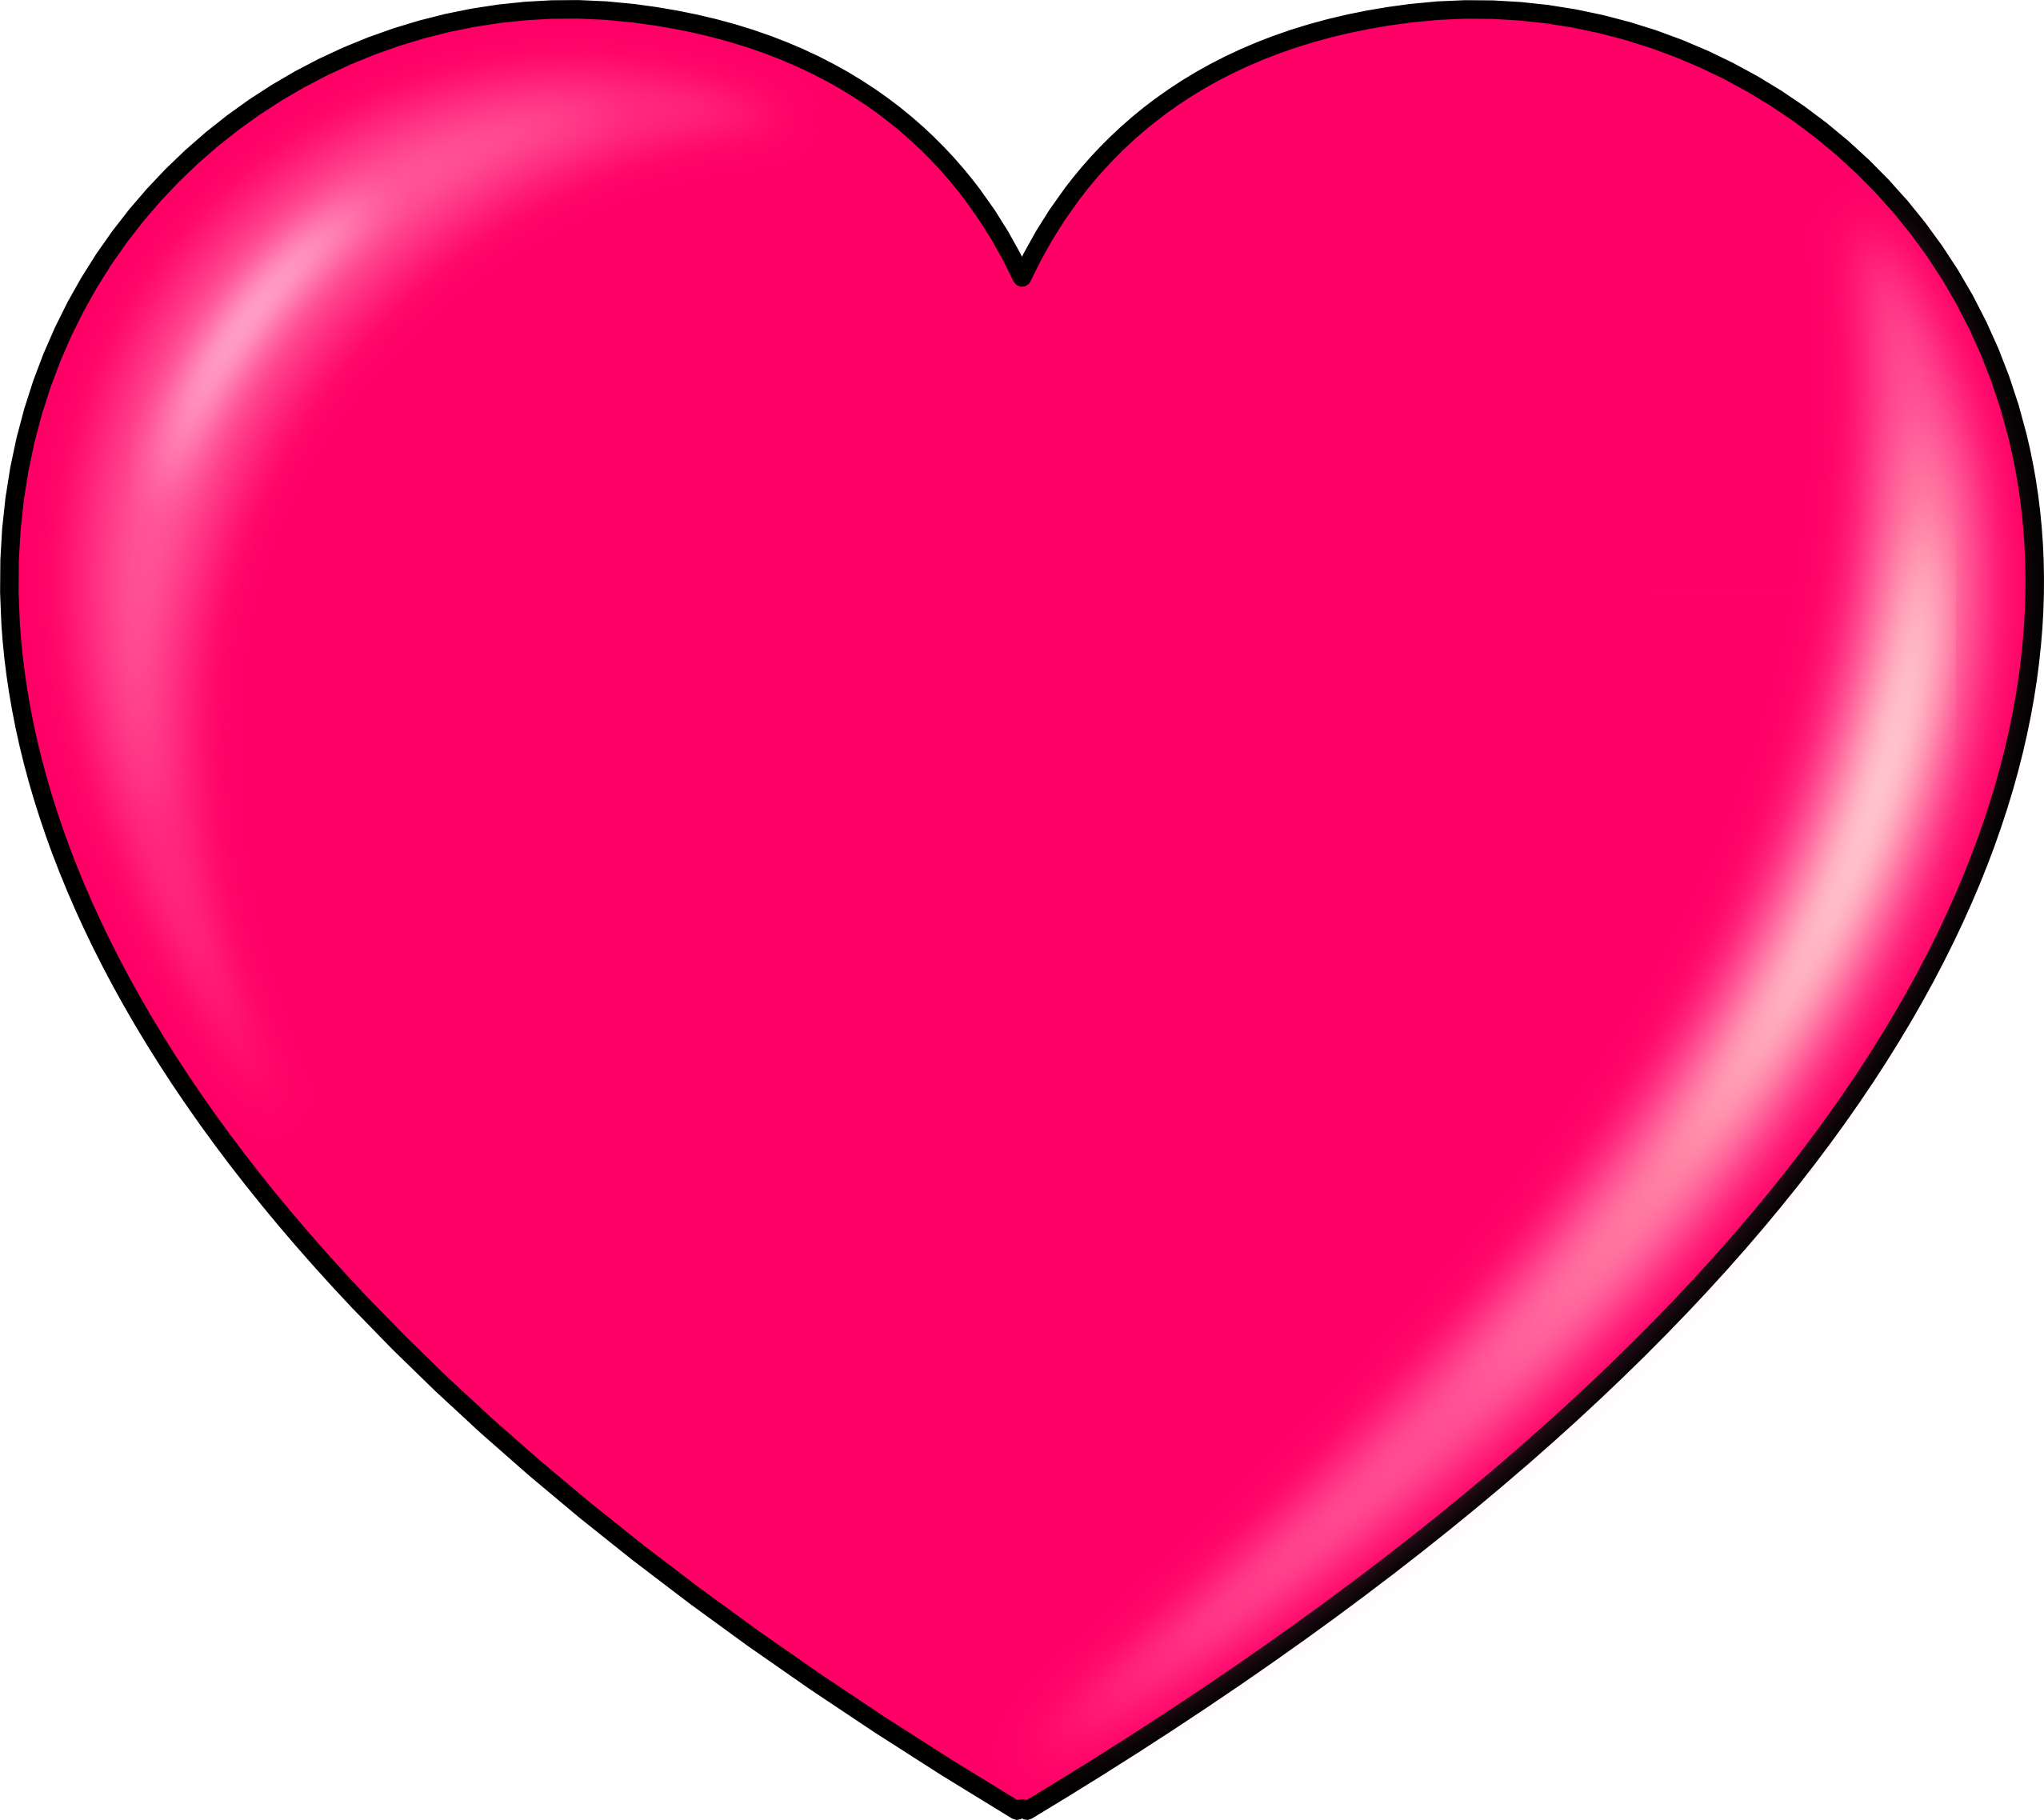 Beautiful heart clipart free download